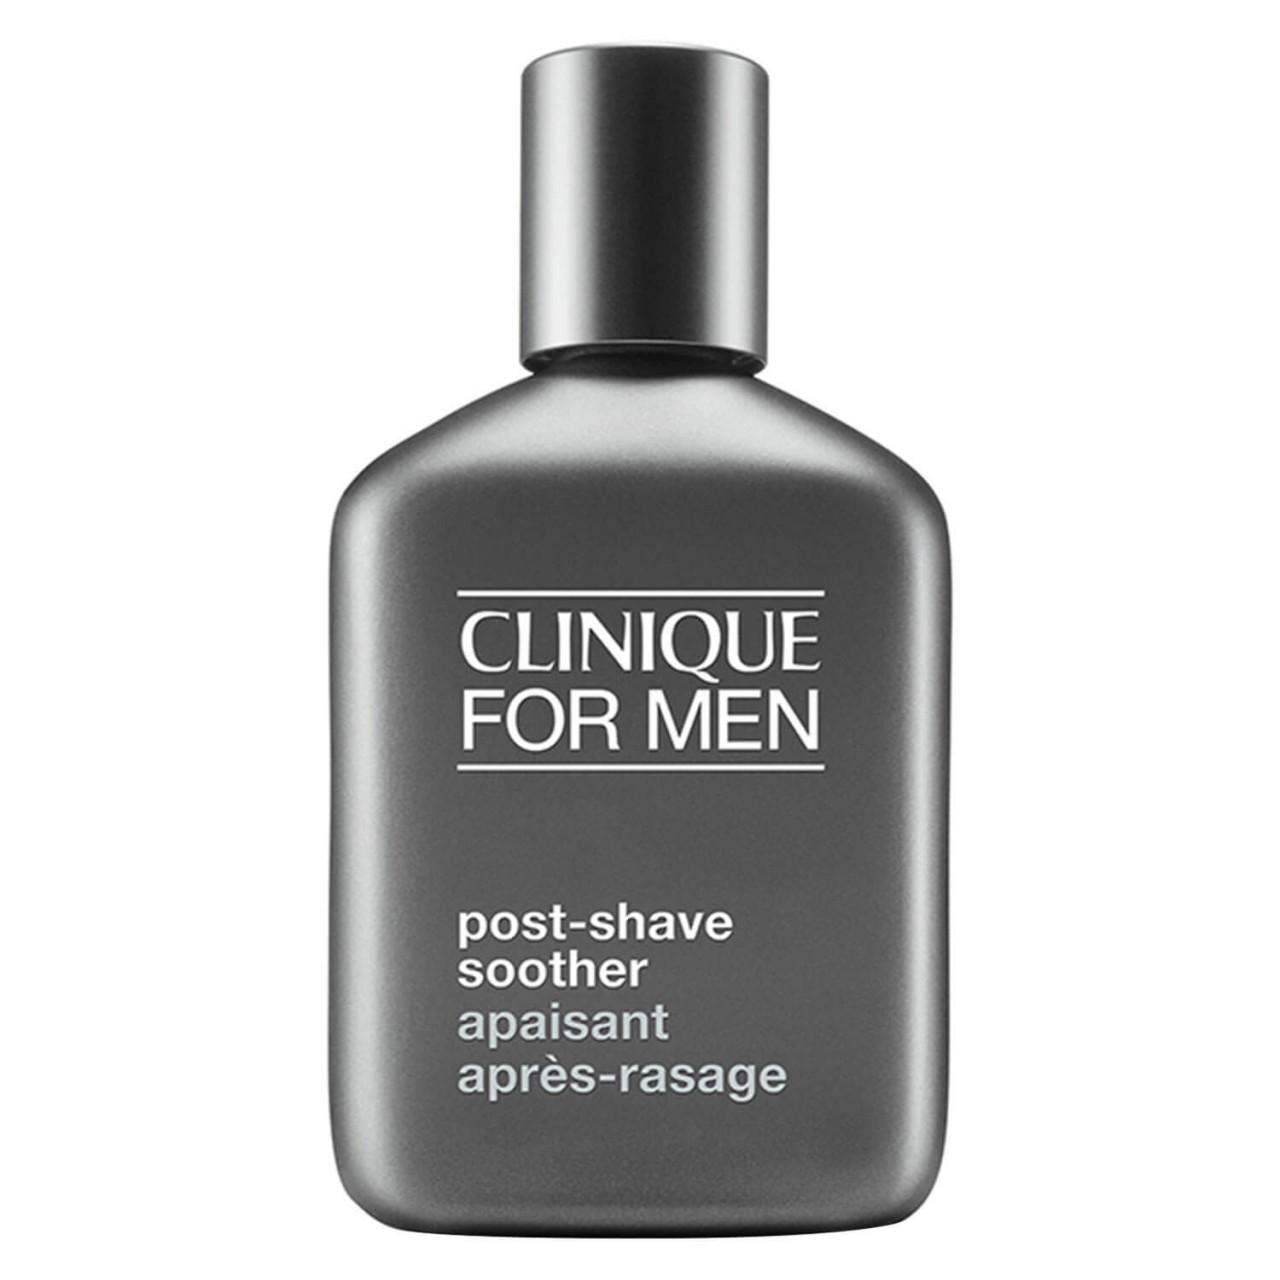 Clinique - Post Shave Soother